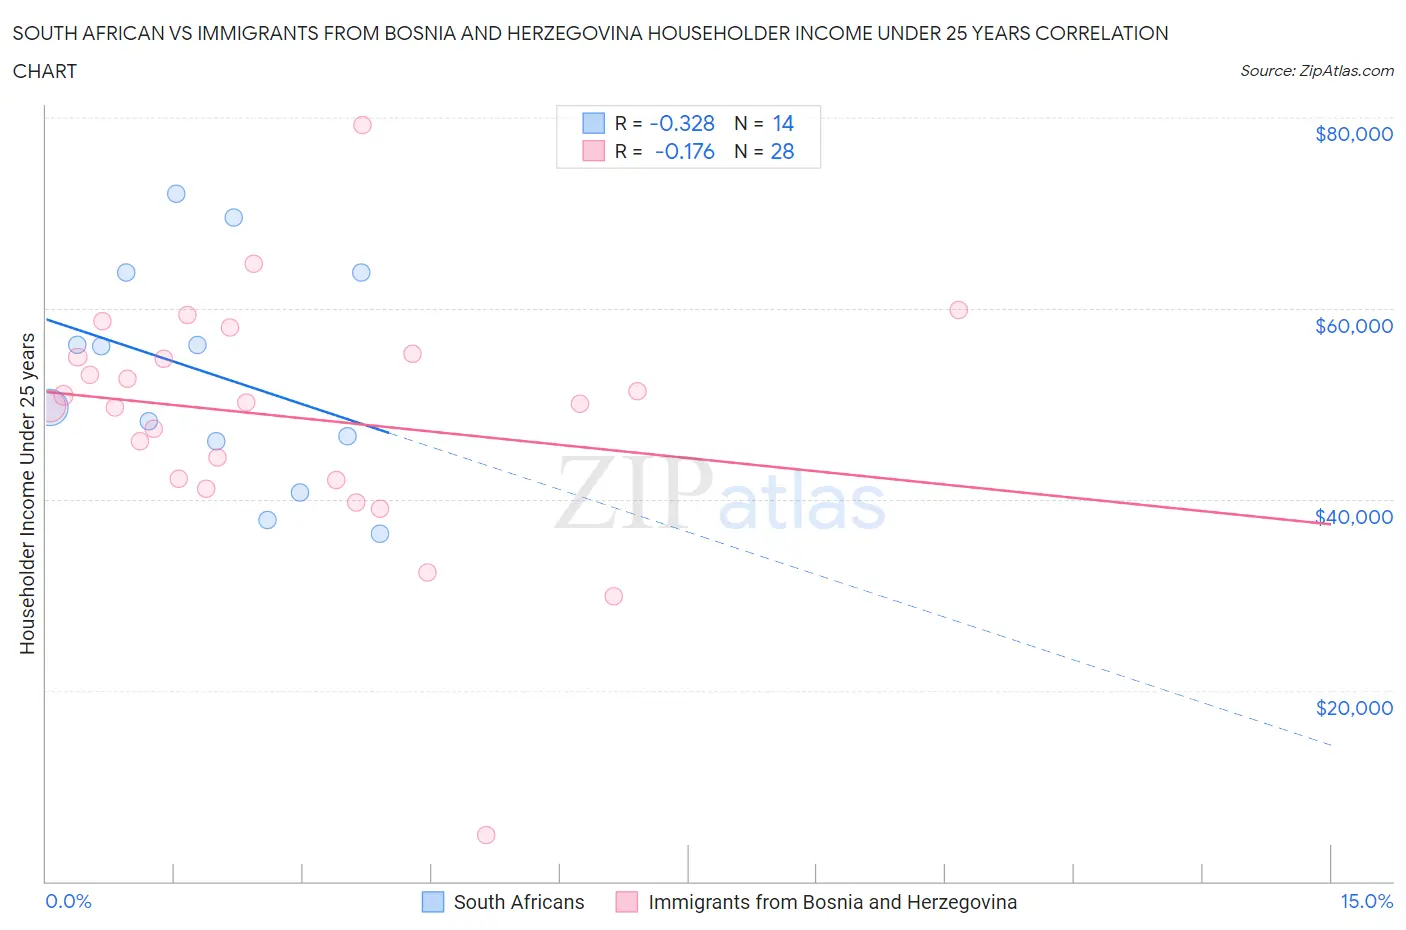 South African vs Immigrants from Bosnia and Herzegovina Householder Income Under 25 years